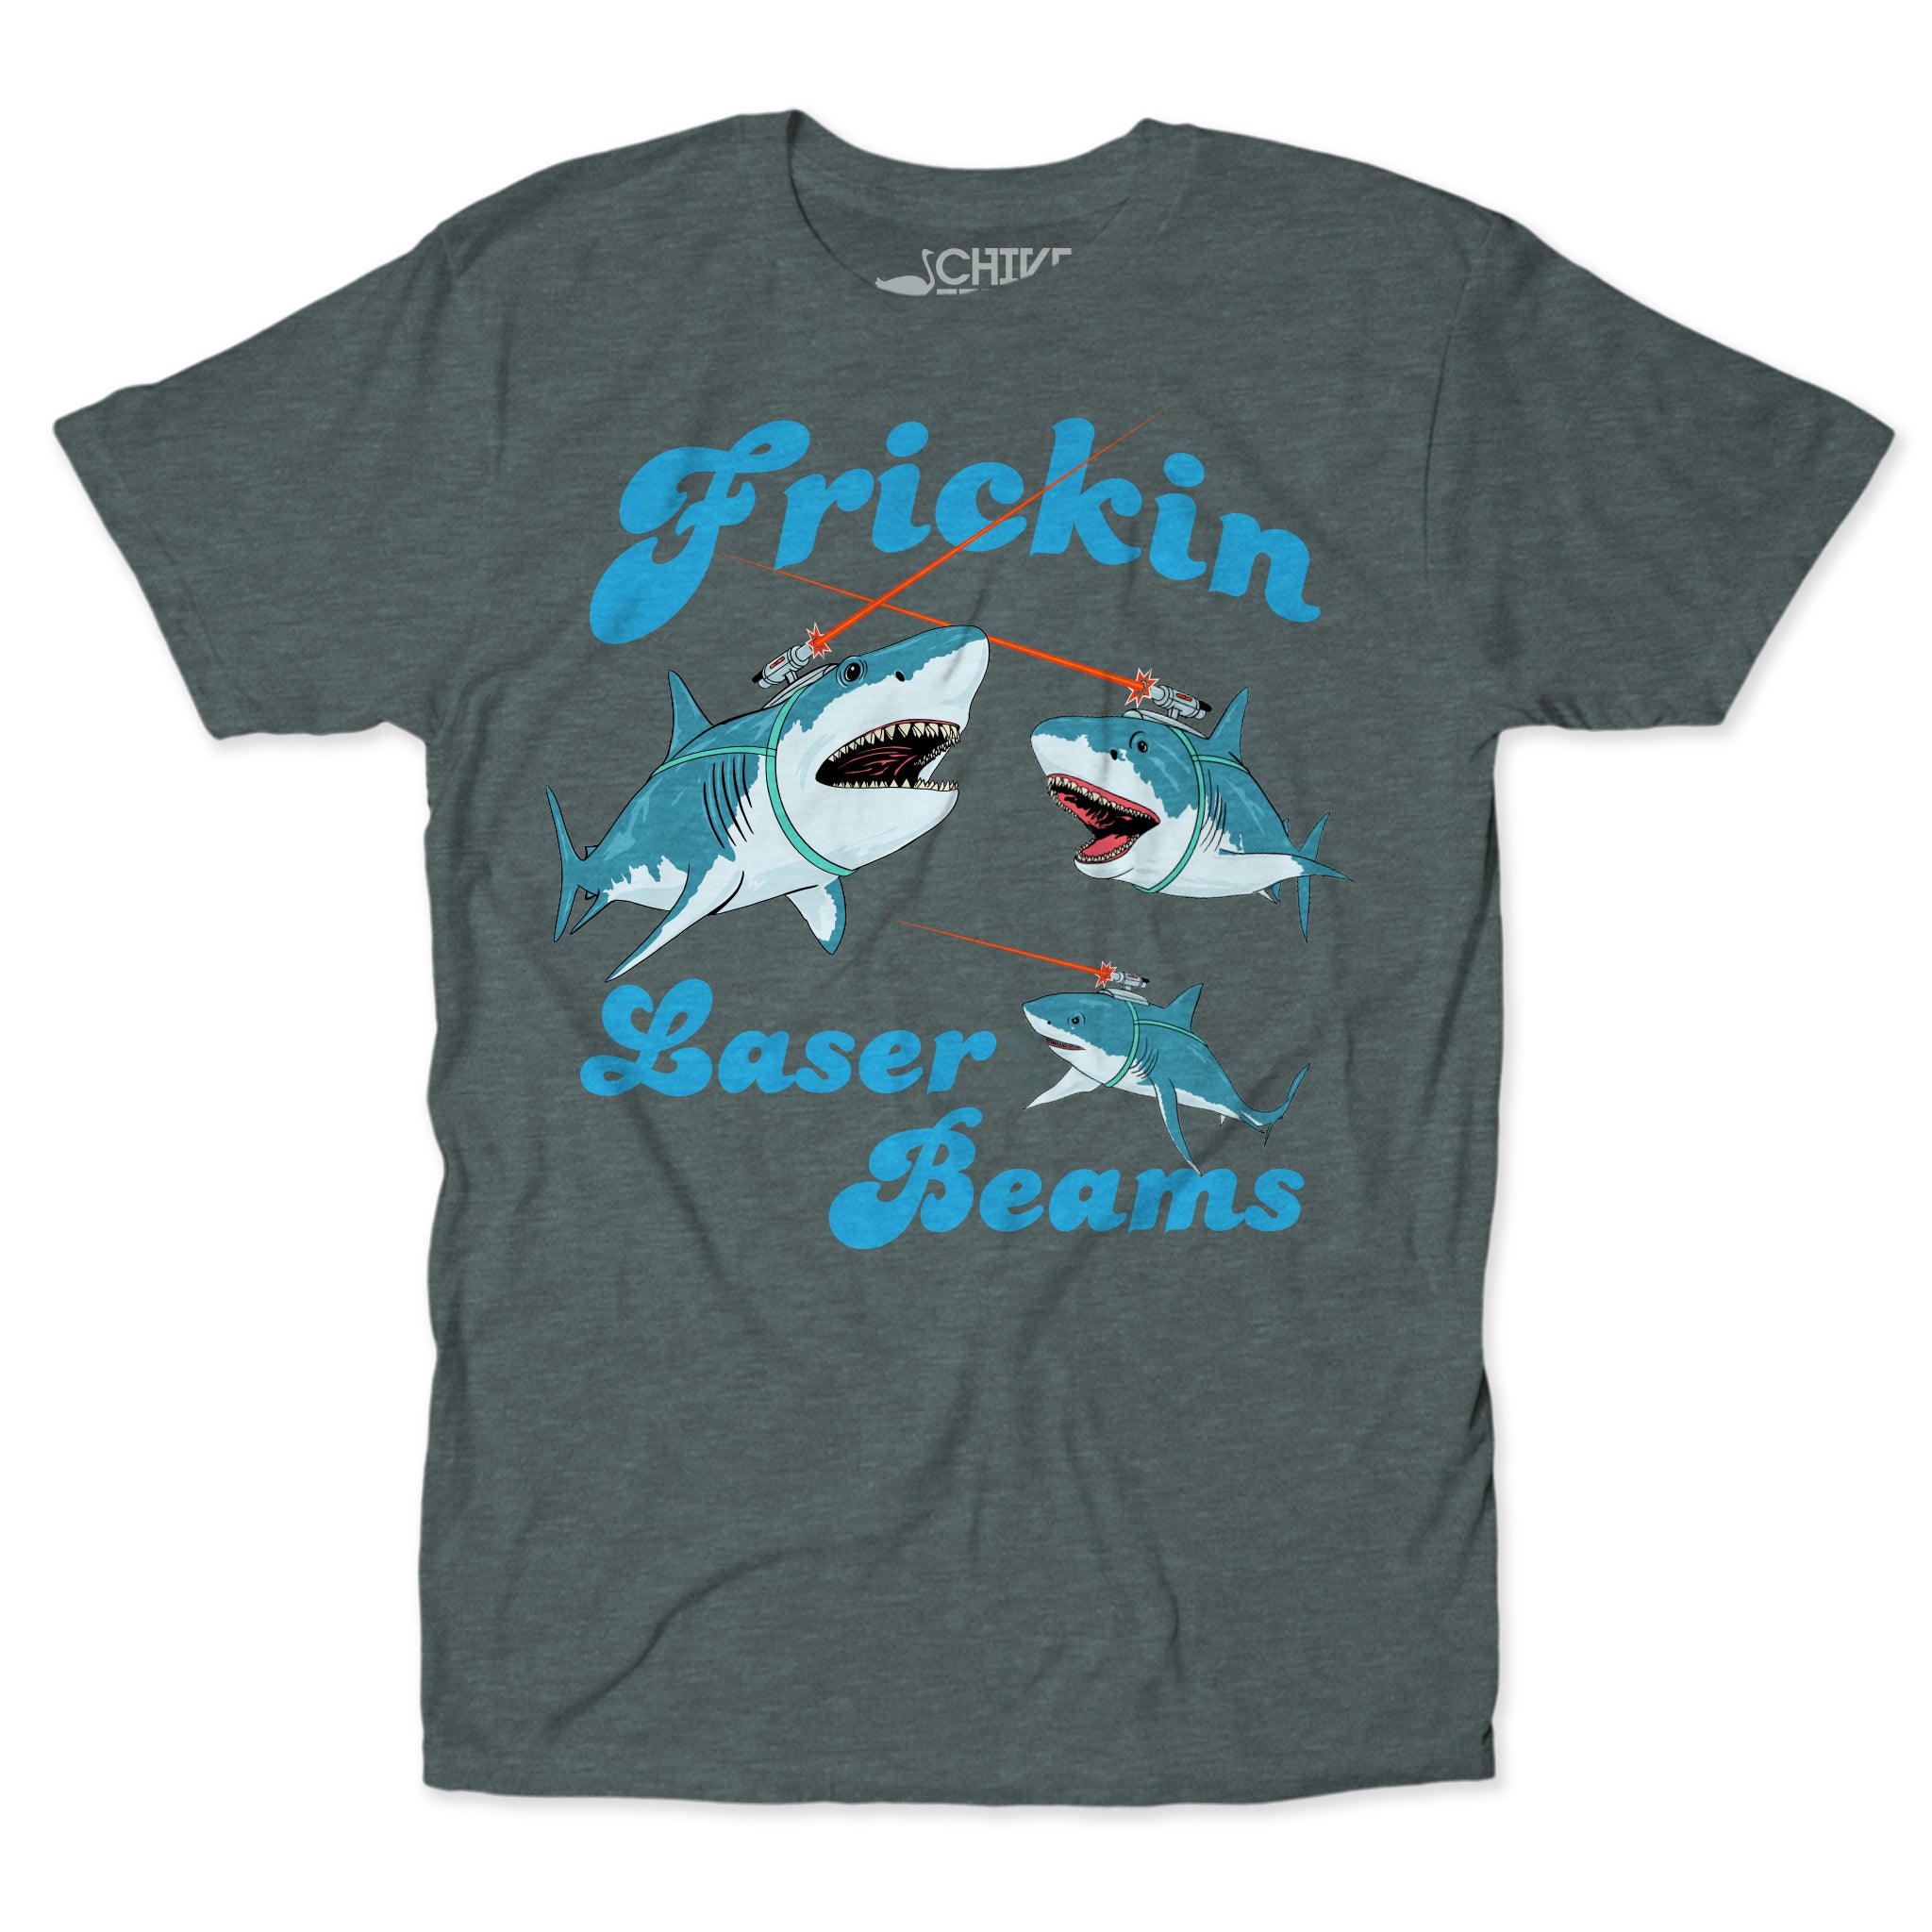 Busch Light Big Fish Unisex Tee – The Chivery